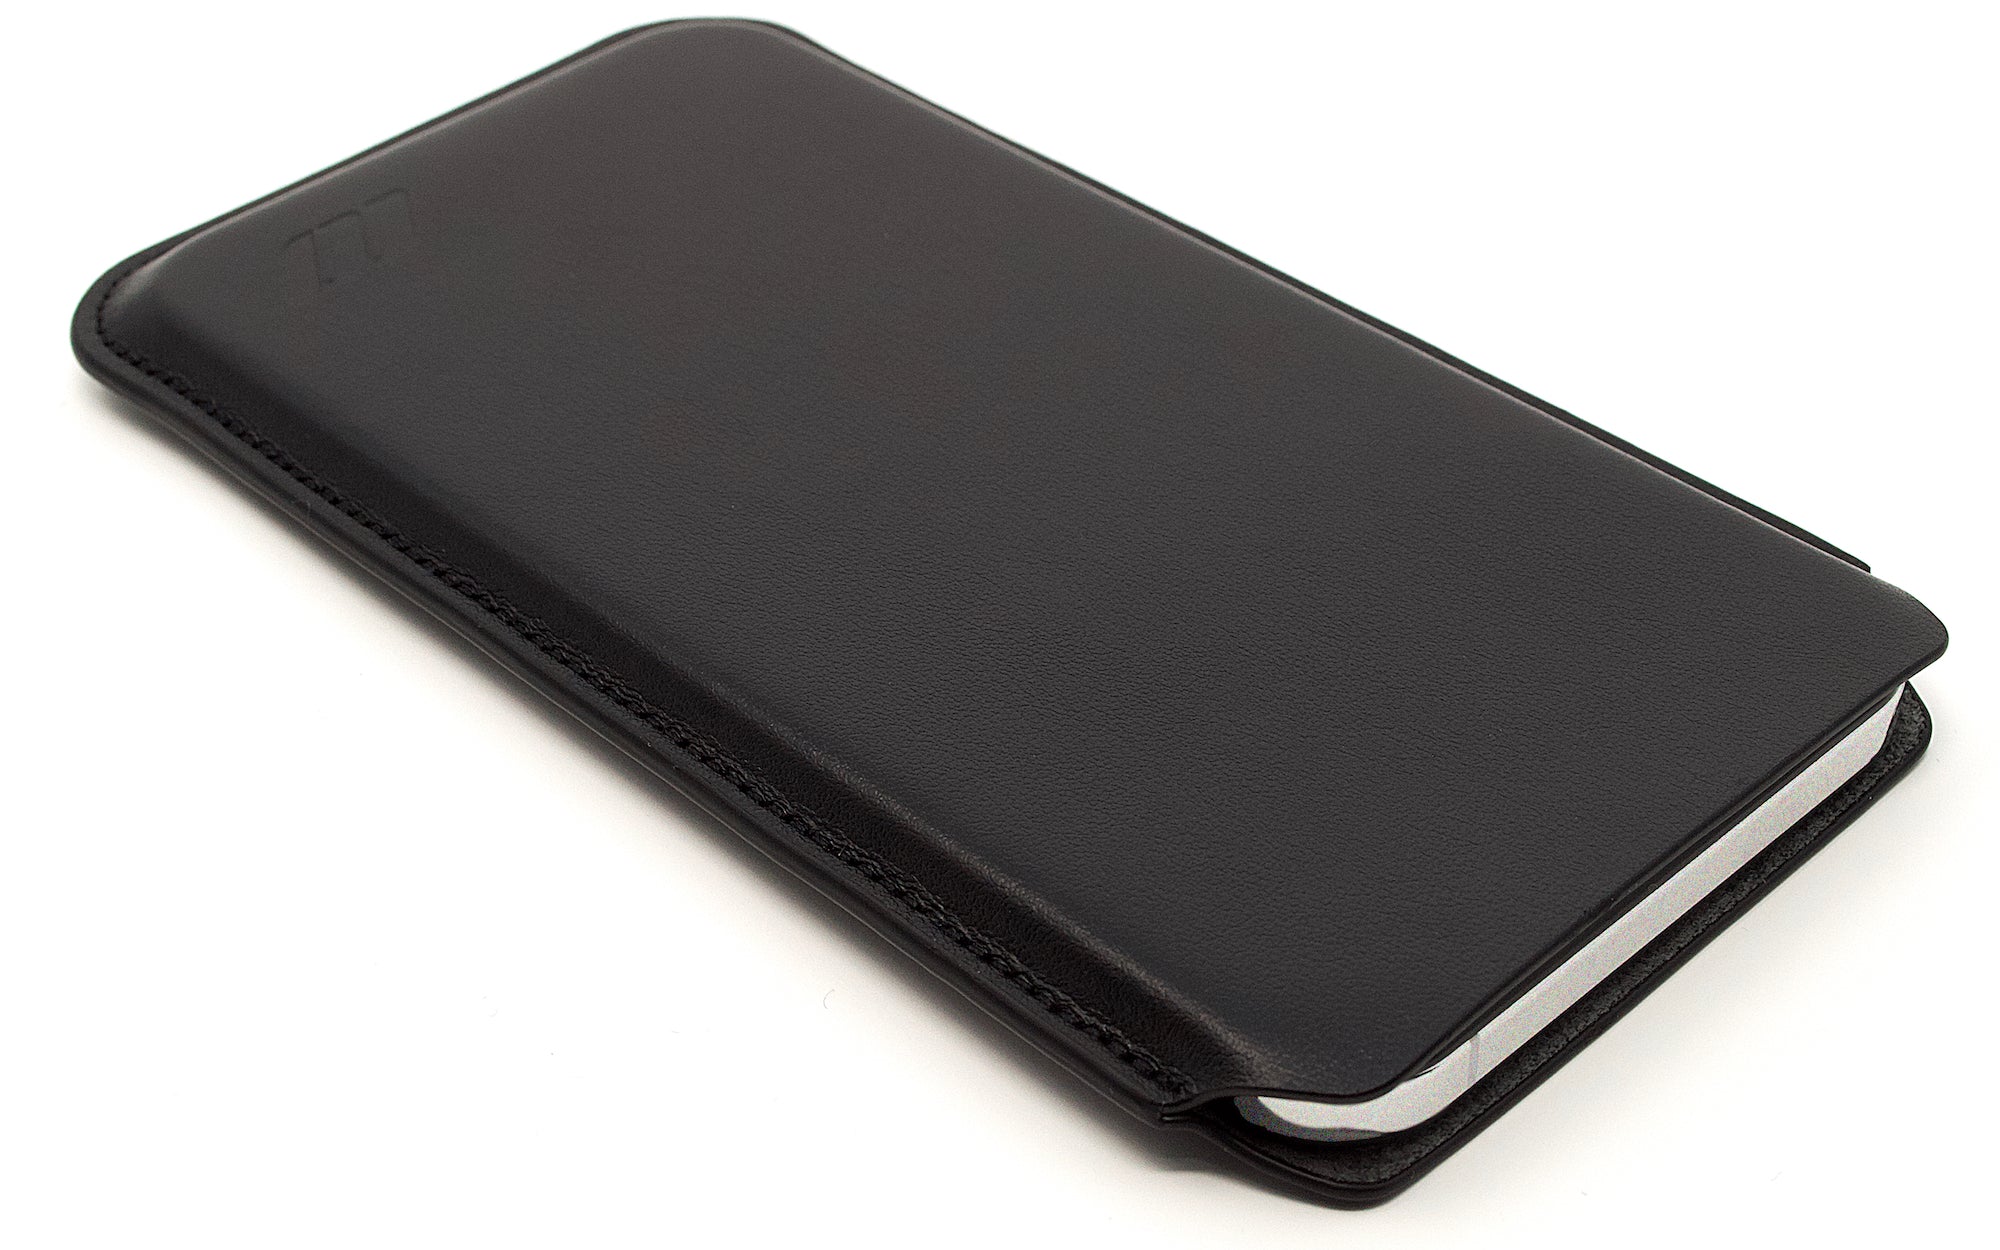 Apple iPhone 13 Mini Leather Sleeve Case Pouch - Black